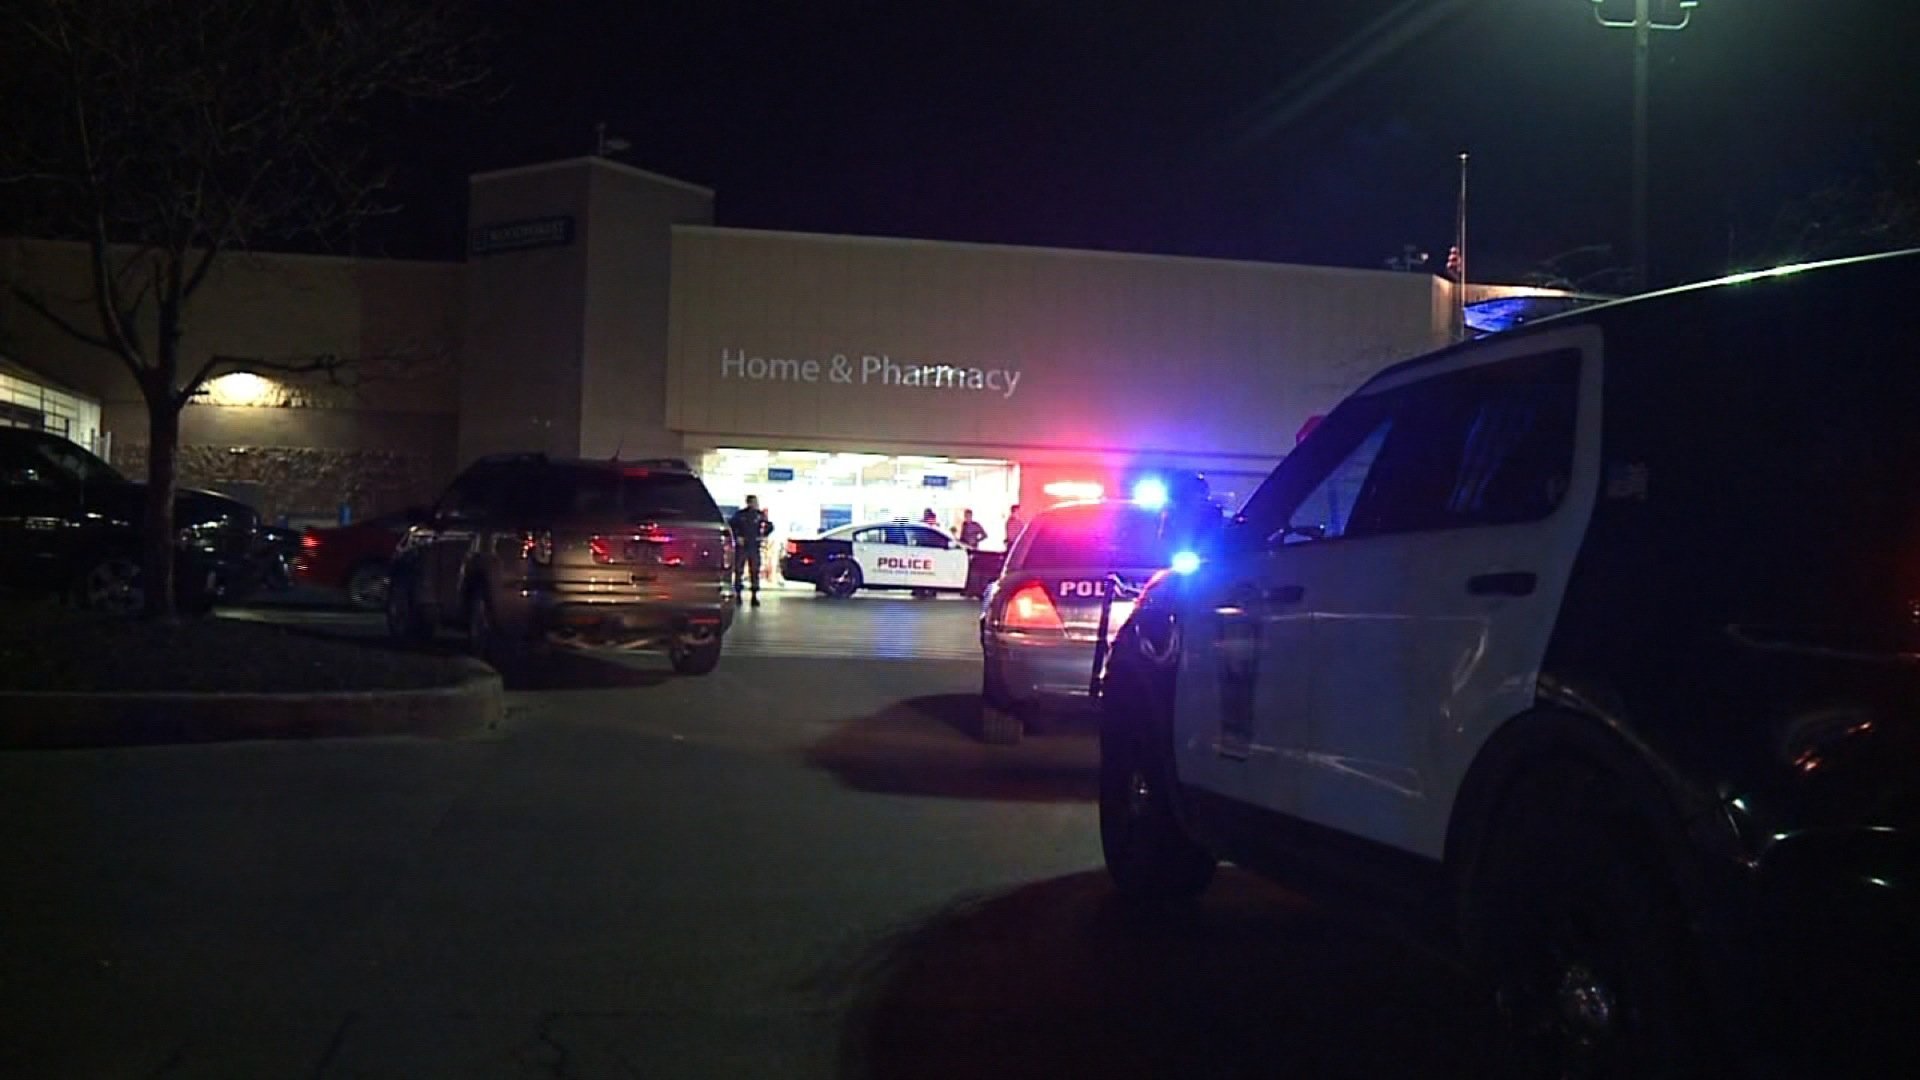 A man wielding a gun was shot and killed at a Walmart in Pennsylvania. The man walked into the store in Stroudsburg late Saturday night and started pointing a gun at people, Pennsylvania State Police said. Stroud Area Regional Police were called to the scene. Officers arrived and told the man to drop his gun, but he refused and pointed his weapon at police, authorities said.